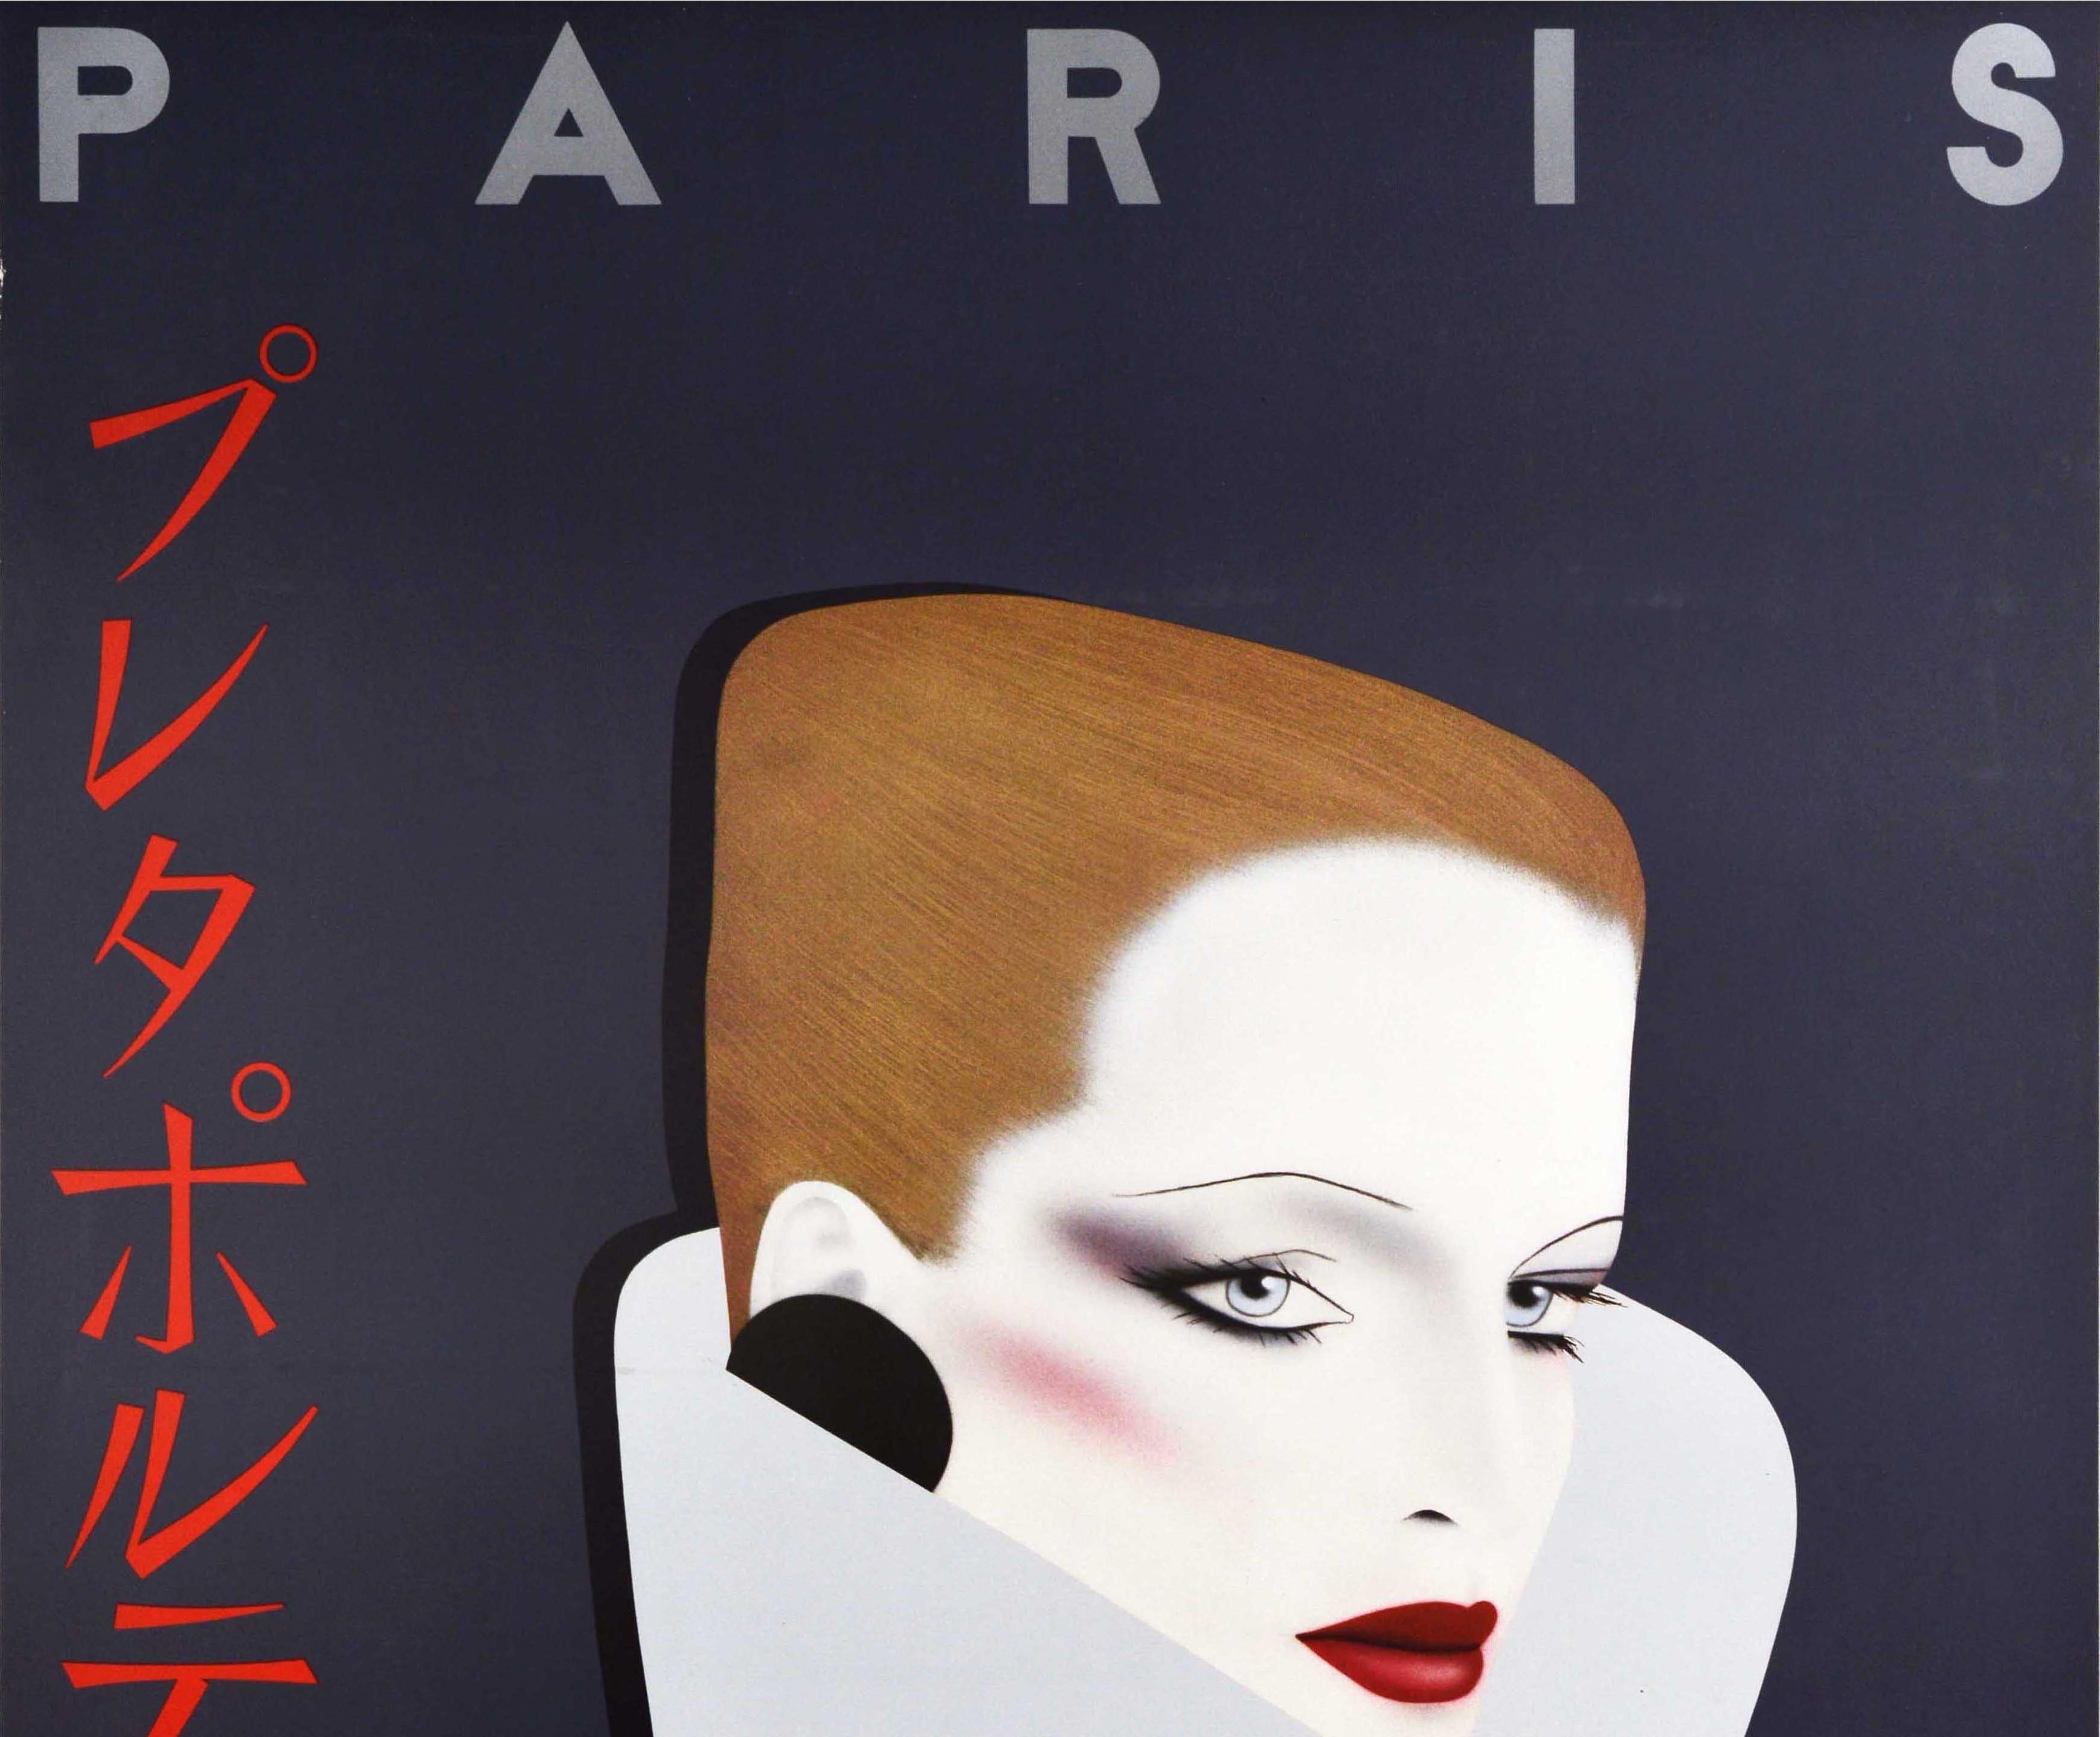 Original vintage haute couture fashion advertising poster - Paris - by Razzia (Gerard Courbouleix Deneriaz; b.1950) featuring a stunning illustration of a stylish model with red lipstick and round black earrings wearing a grey coat against a dark